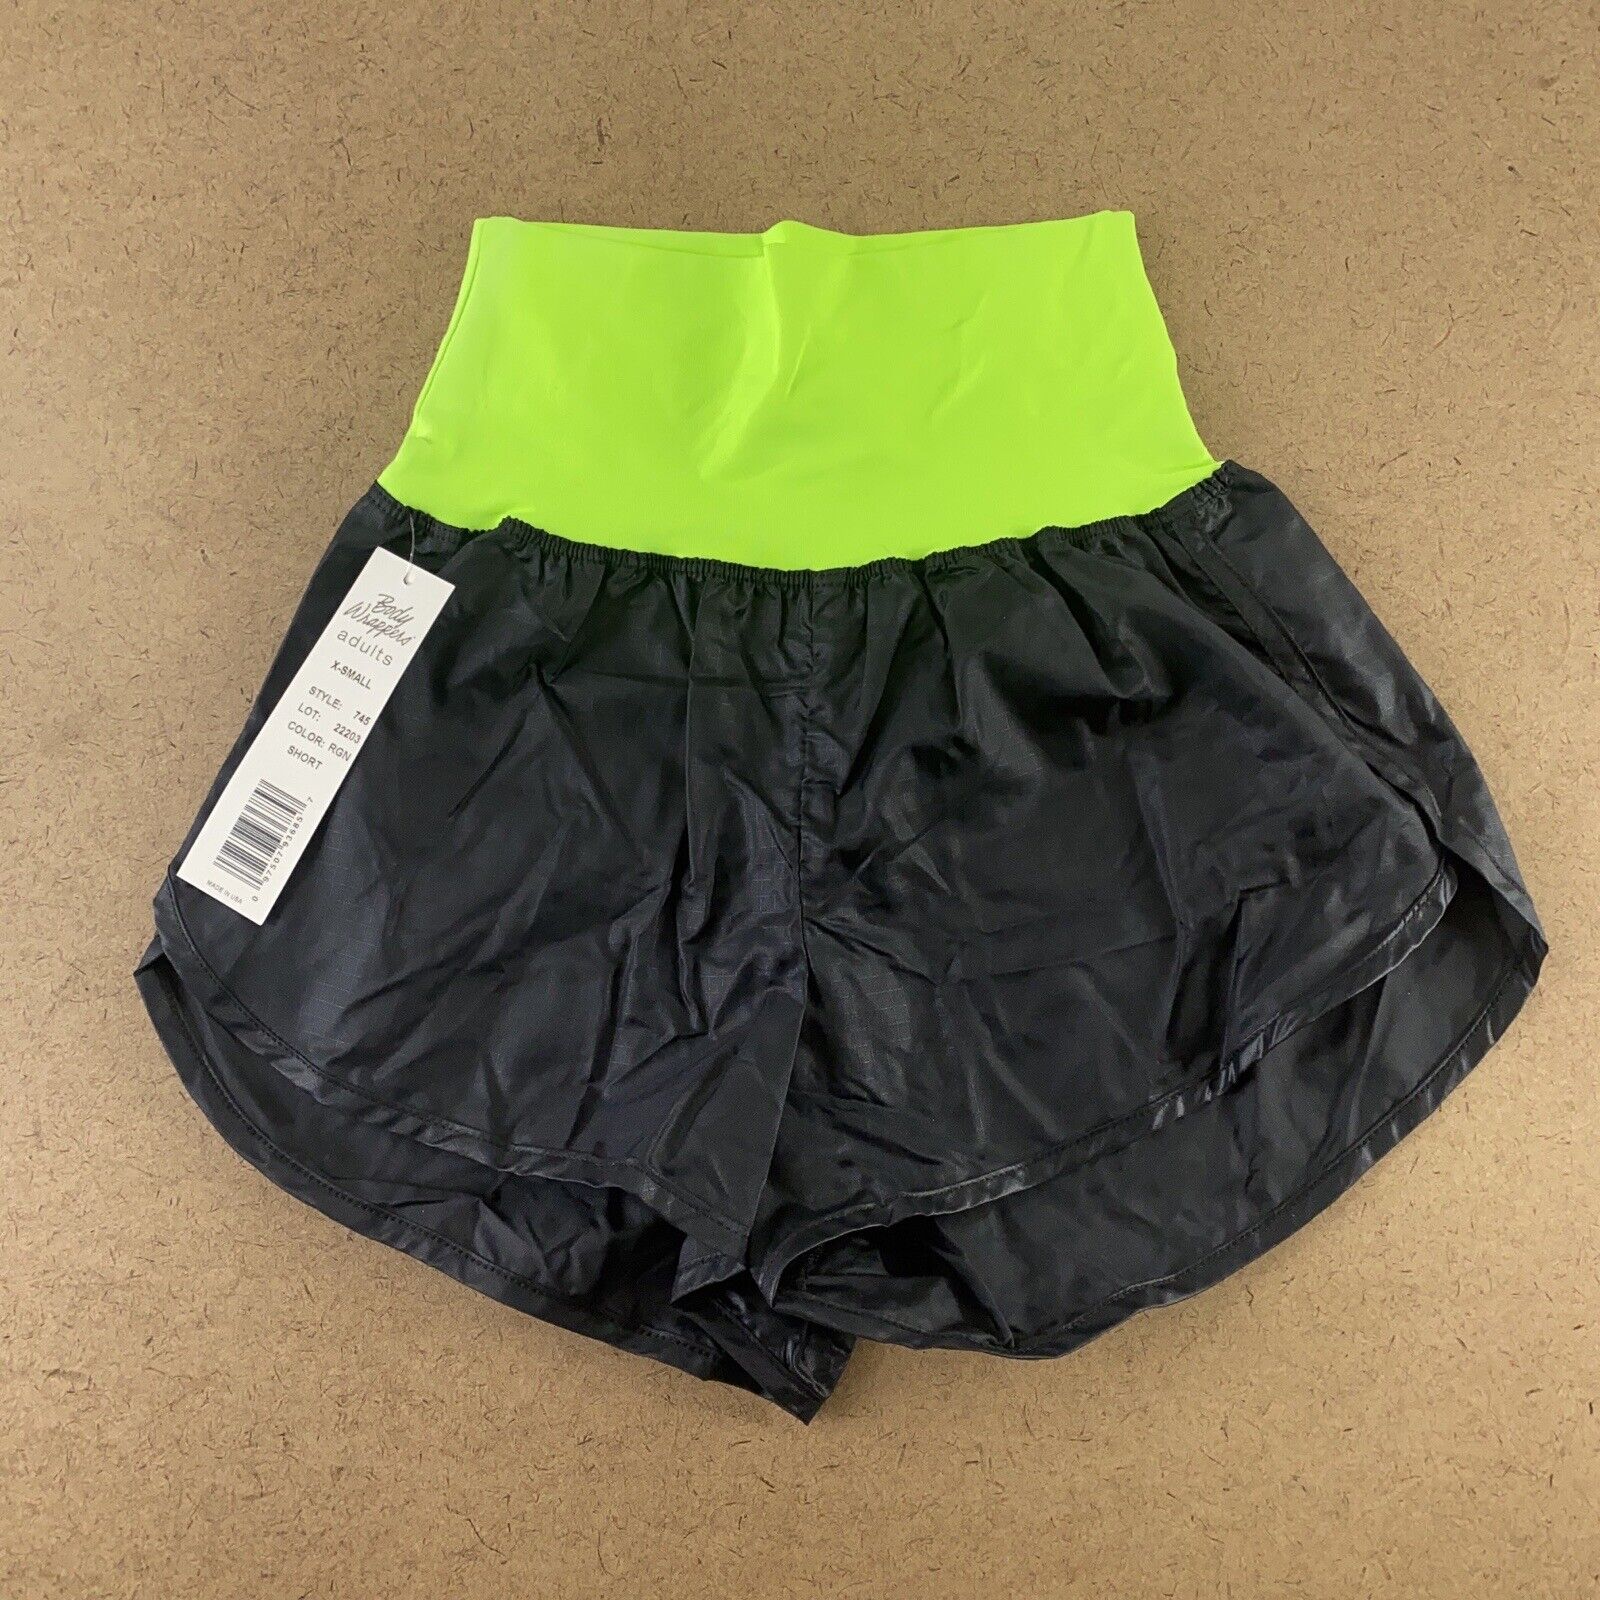 Body Wrappers Adult Size Xs Black Neon Green Hi Rise Ripstop Dance Short 745 Nwt